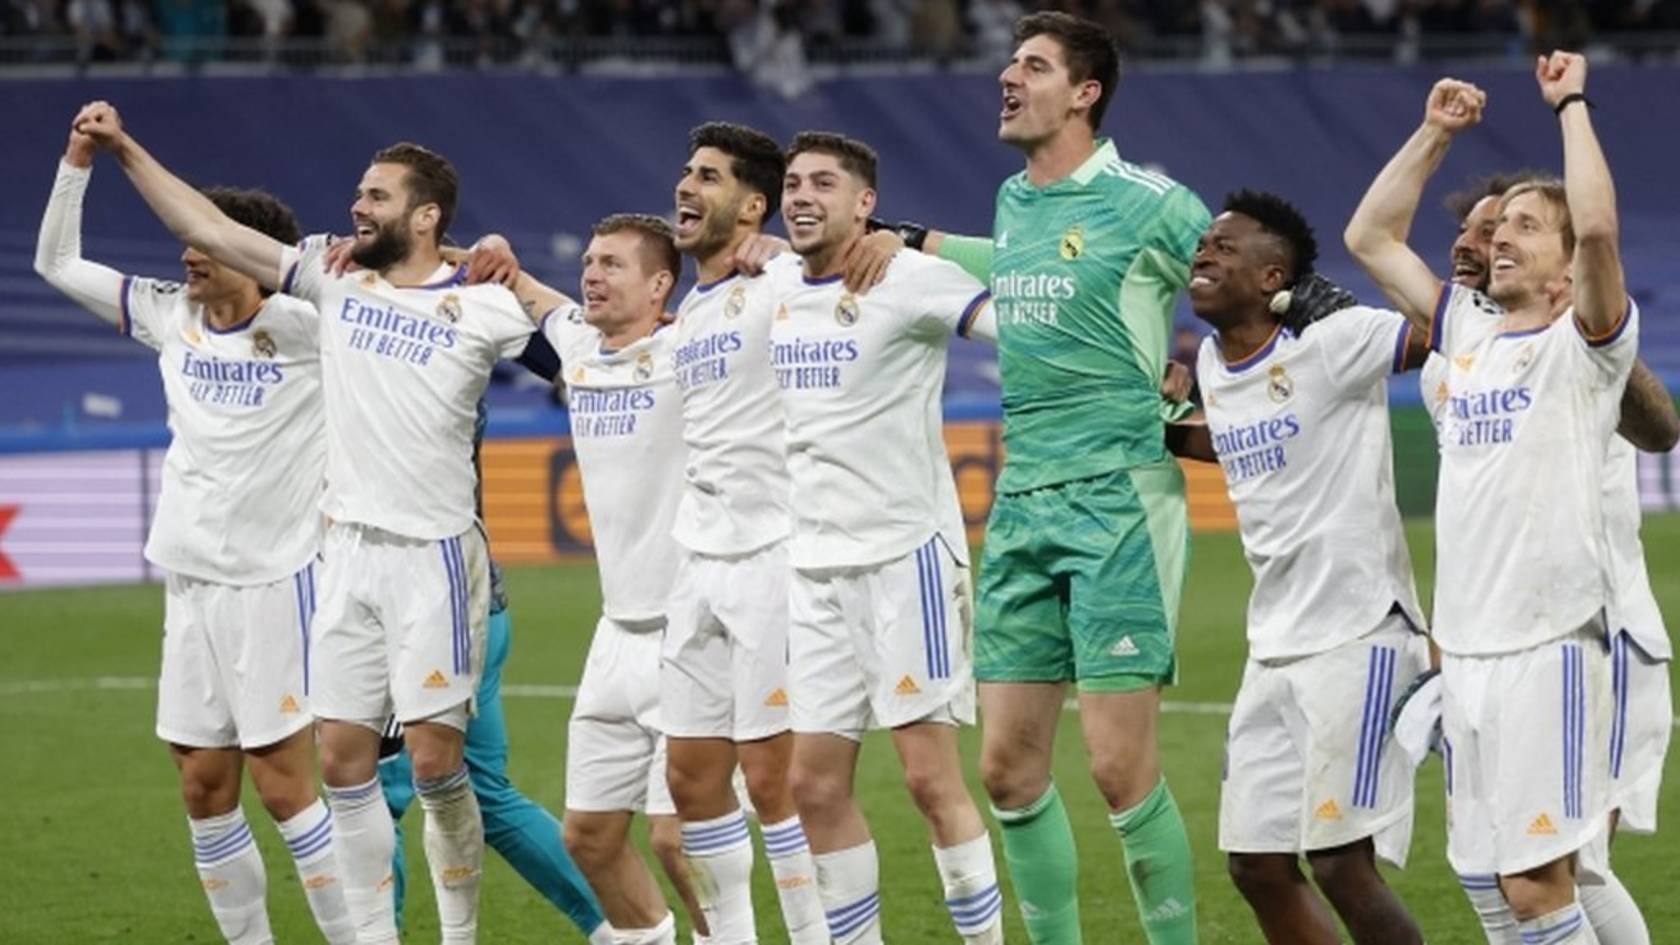 Real Madrid players celebrate after knocking Manchester City out of the Champions League semi-finals